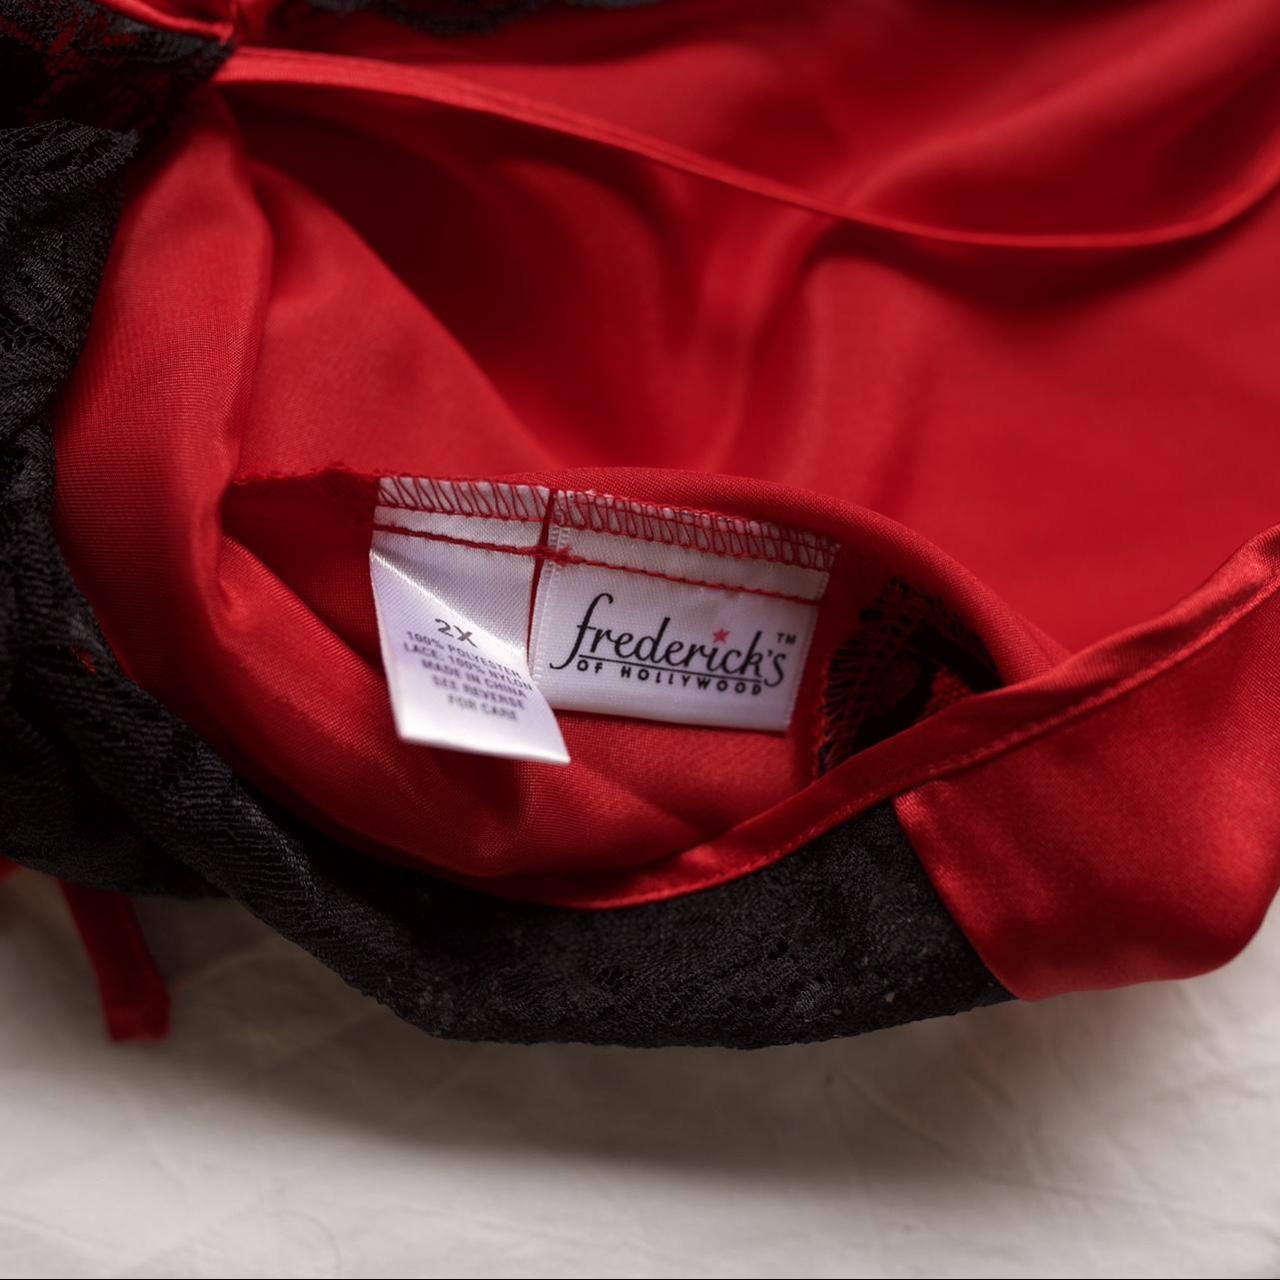 Frederick's of Hollywood Women's Red and Black Dress | Depop